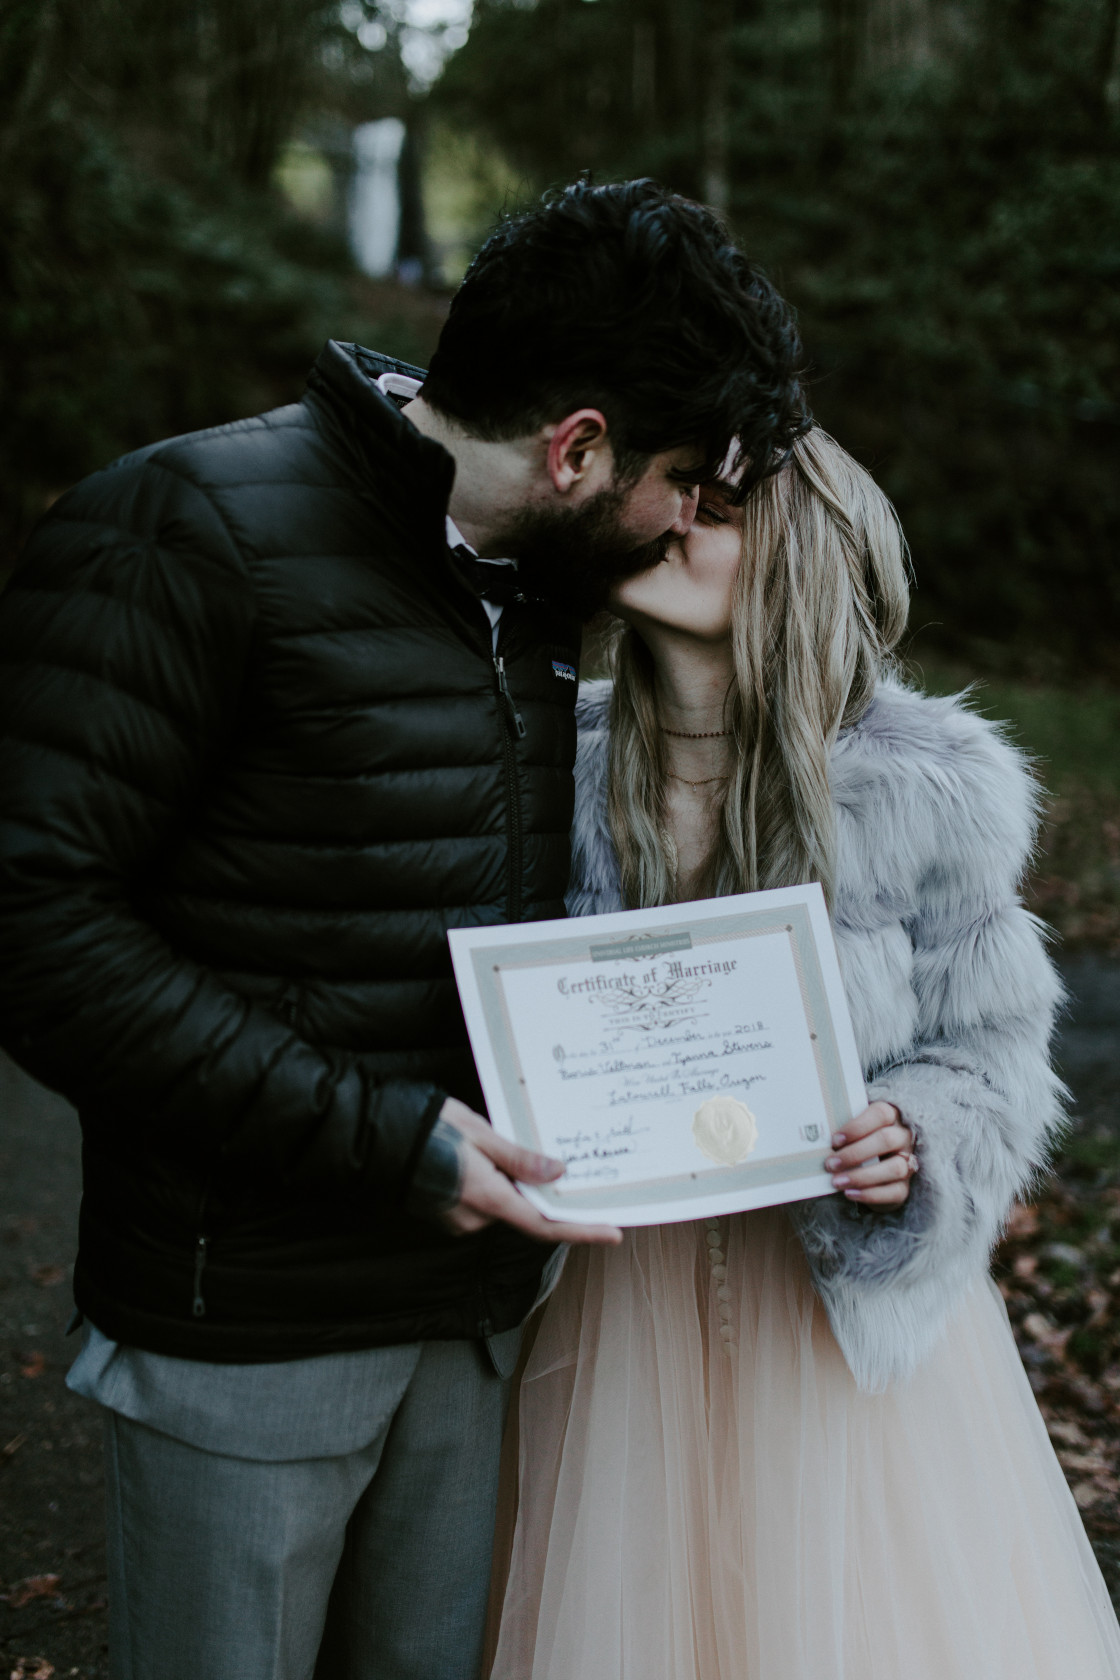 Boris and Tyanna kiss while holding their marriage certificate at Latourell Falls. Adventure elopement in the Columbia River Gorge by Sienna Plus Josh.